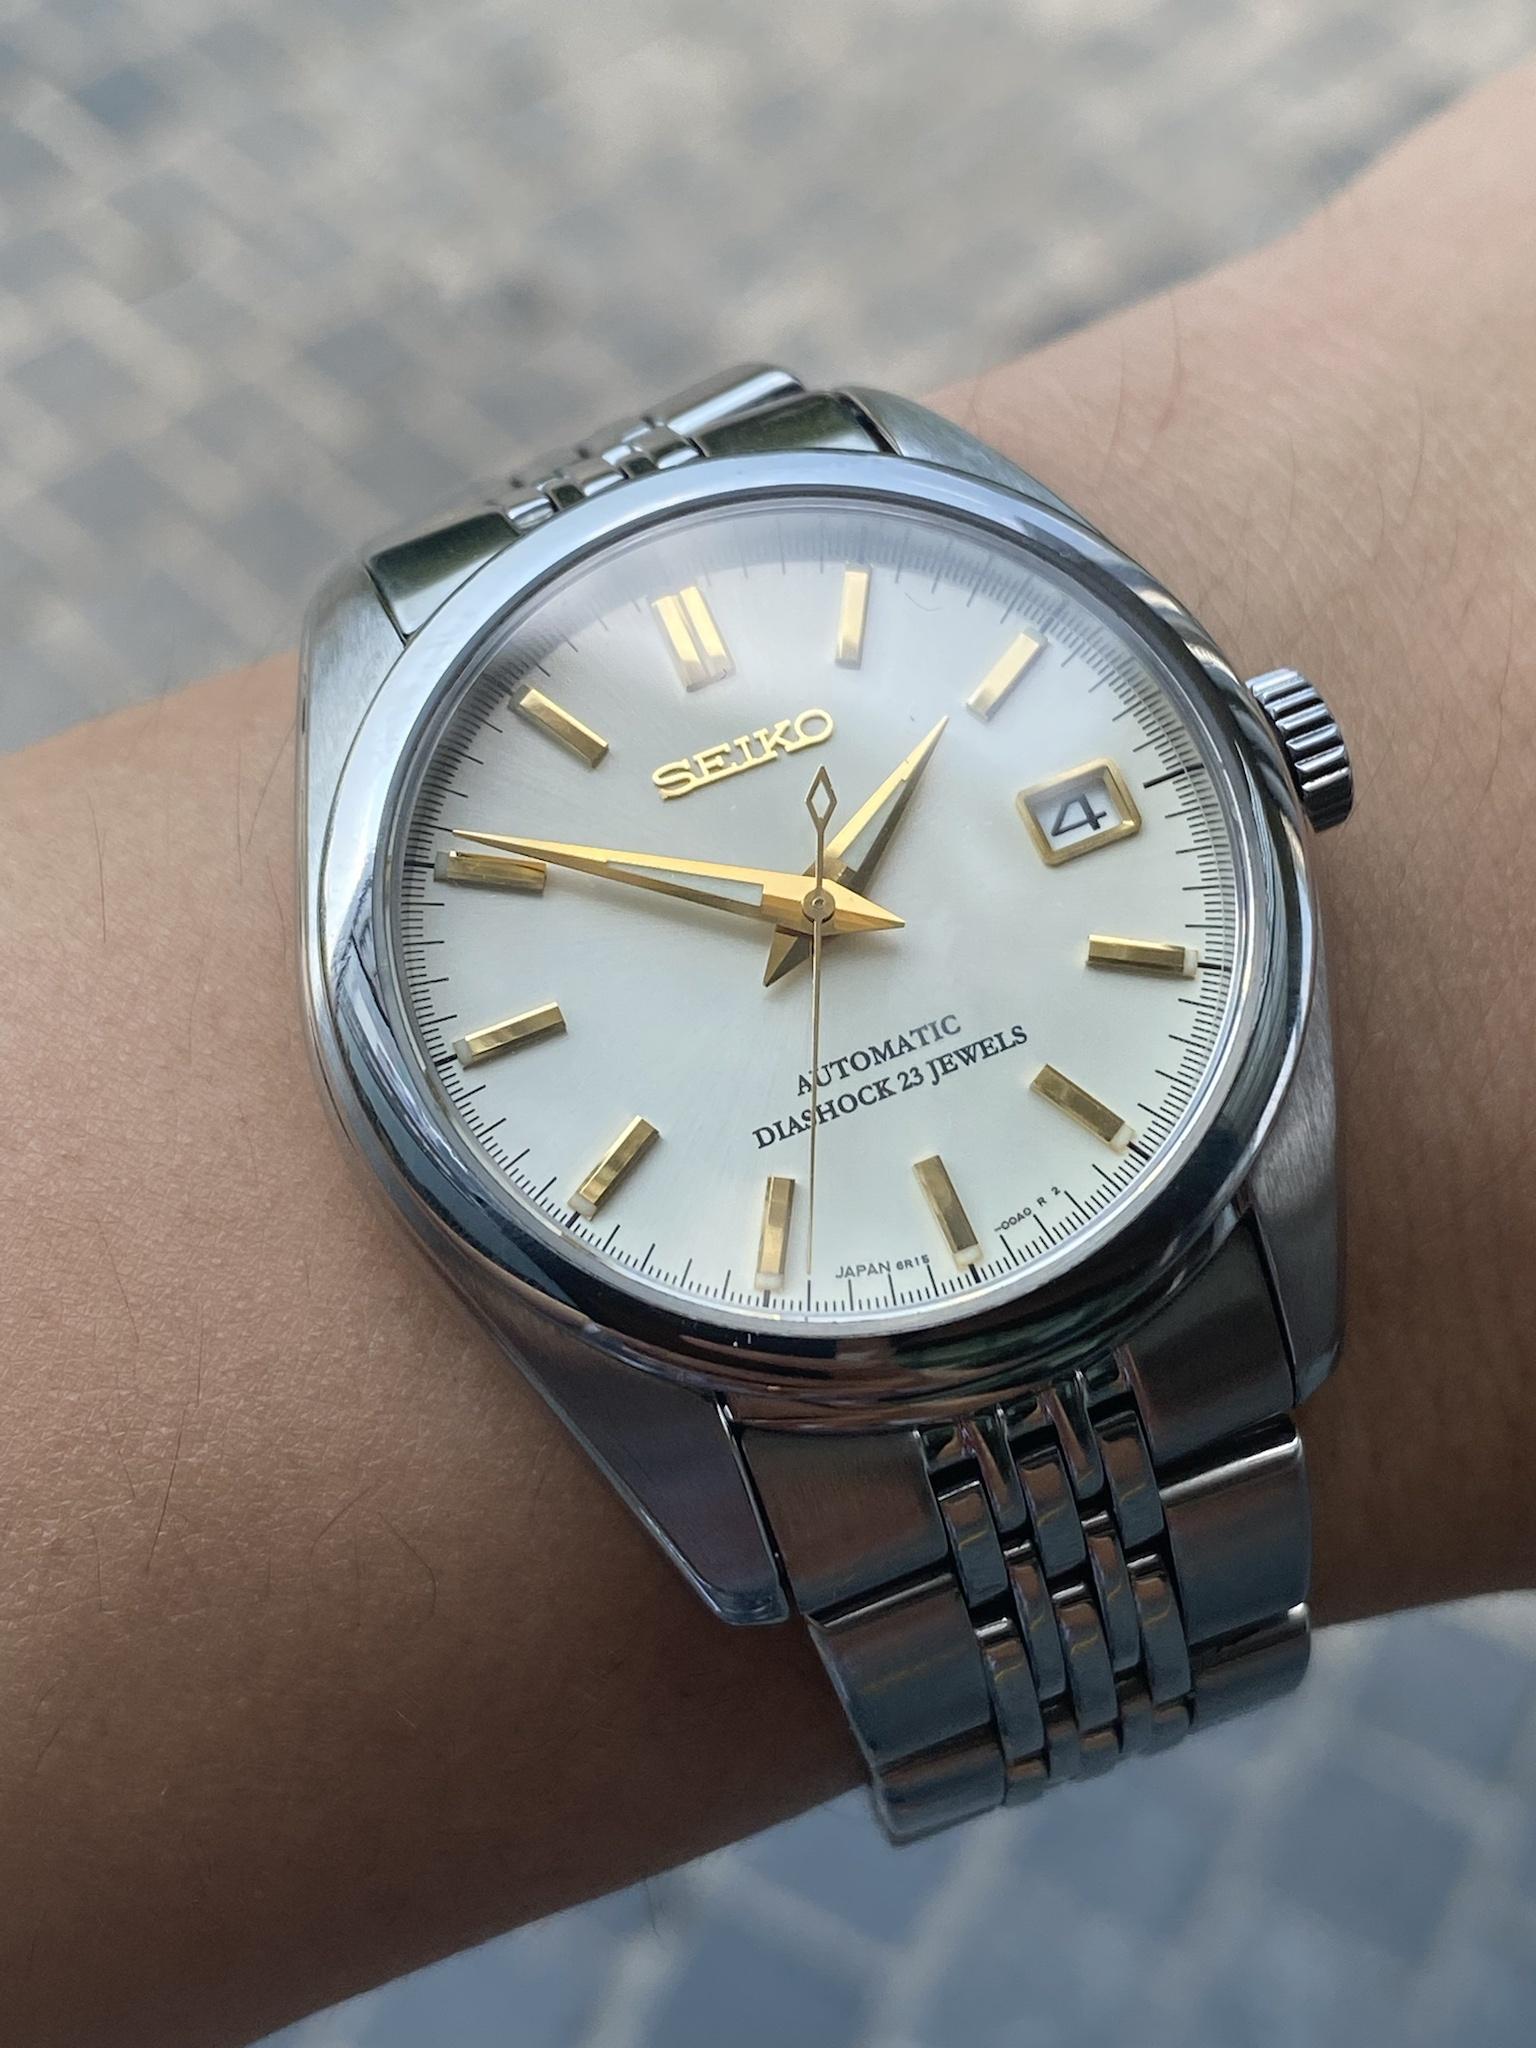 WTS] Seiko SCVS001 in great condition - the 2nd watch | WatchCharts